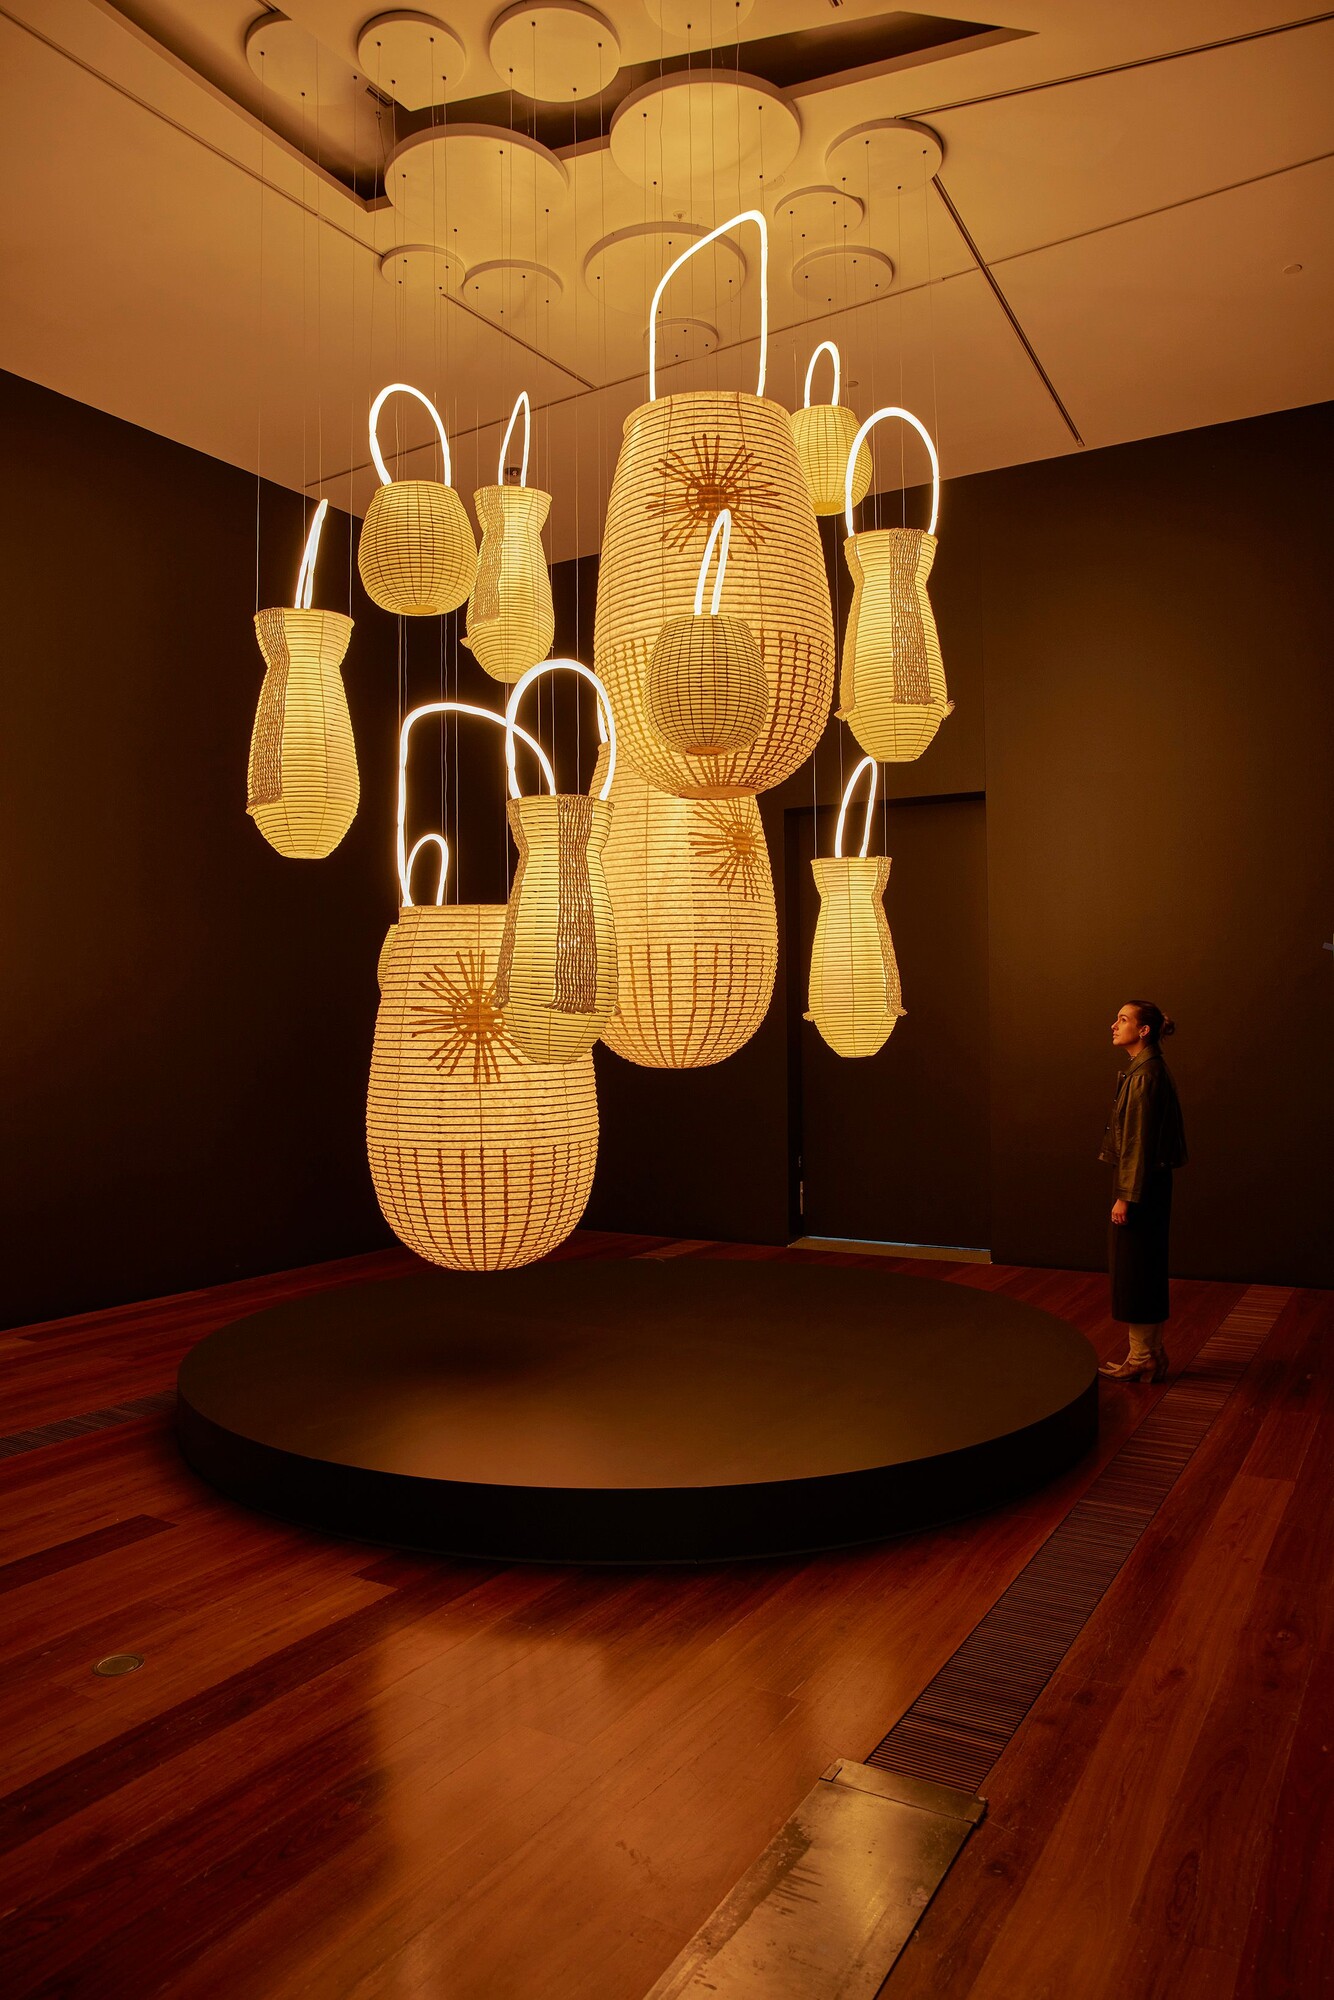 Installation view of Jenna Lee and Kojima Shouten’s <em>Balarr (To become light)</em> 2023 on display as part of the Melbourne Now exhibition at The Ian Potter Centre: NGV Australia, Melbourne from 24 March to 20 August 2023. Photo: Sean Fennessy